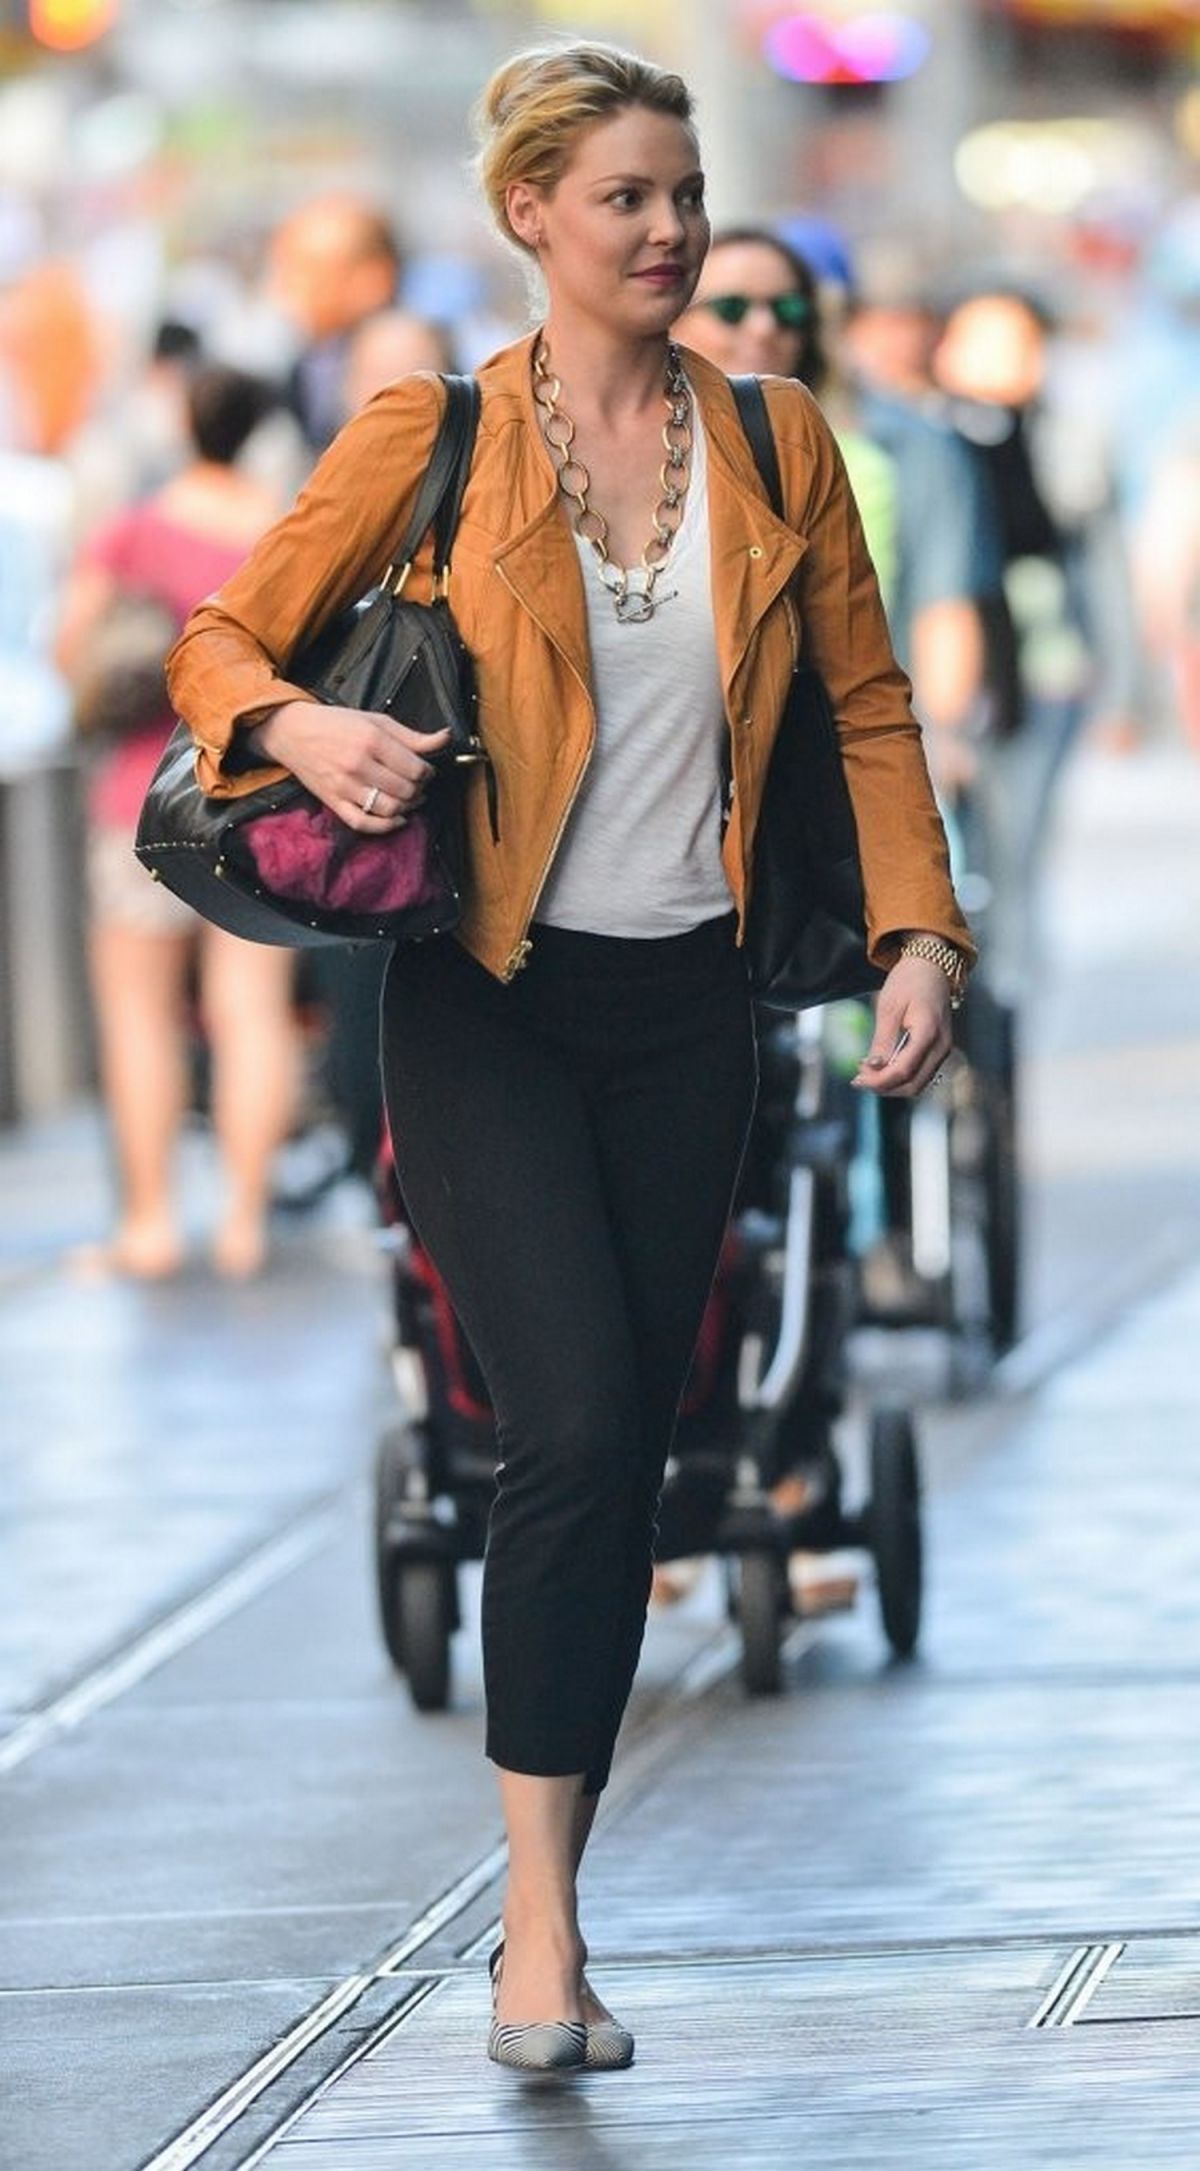 katherine-heigl-out-in-new-york-city_2.jpg